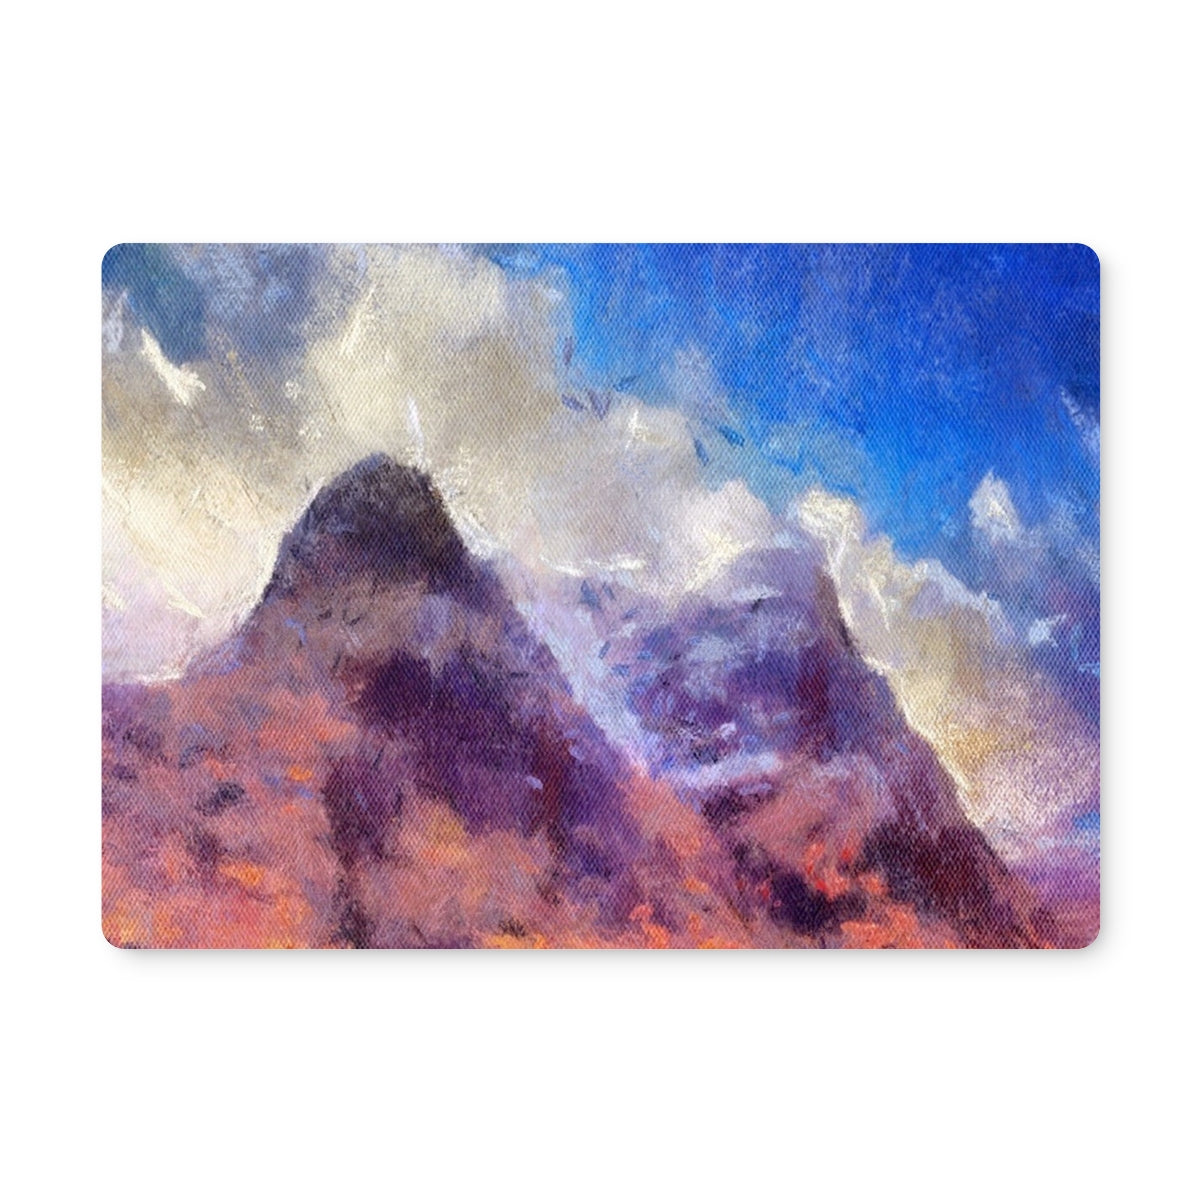 Glencoe Art Gifts Placemat-Placemats-Glencoe Art Gallery-6 Placemats-Paintings, Prints, Homeware, Art Gifts From Scotland By Scottish Artist Kevin Hunter